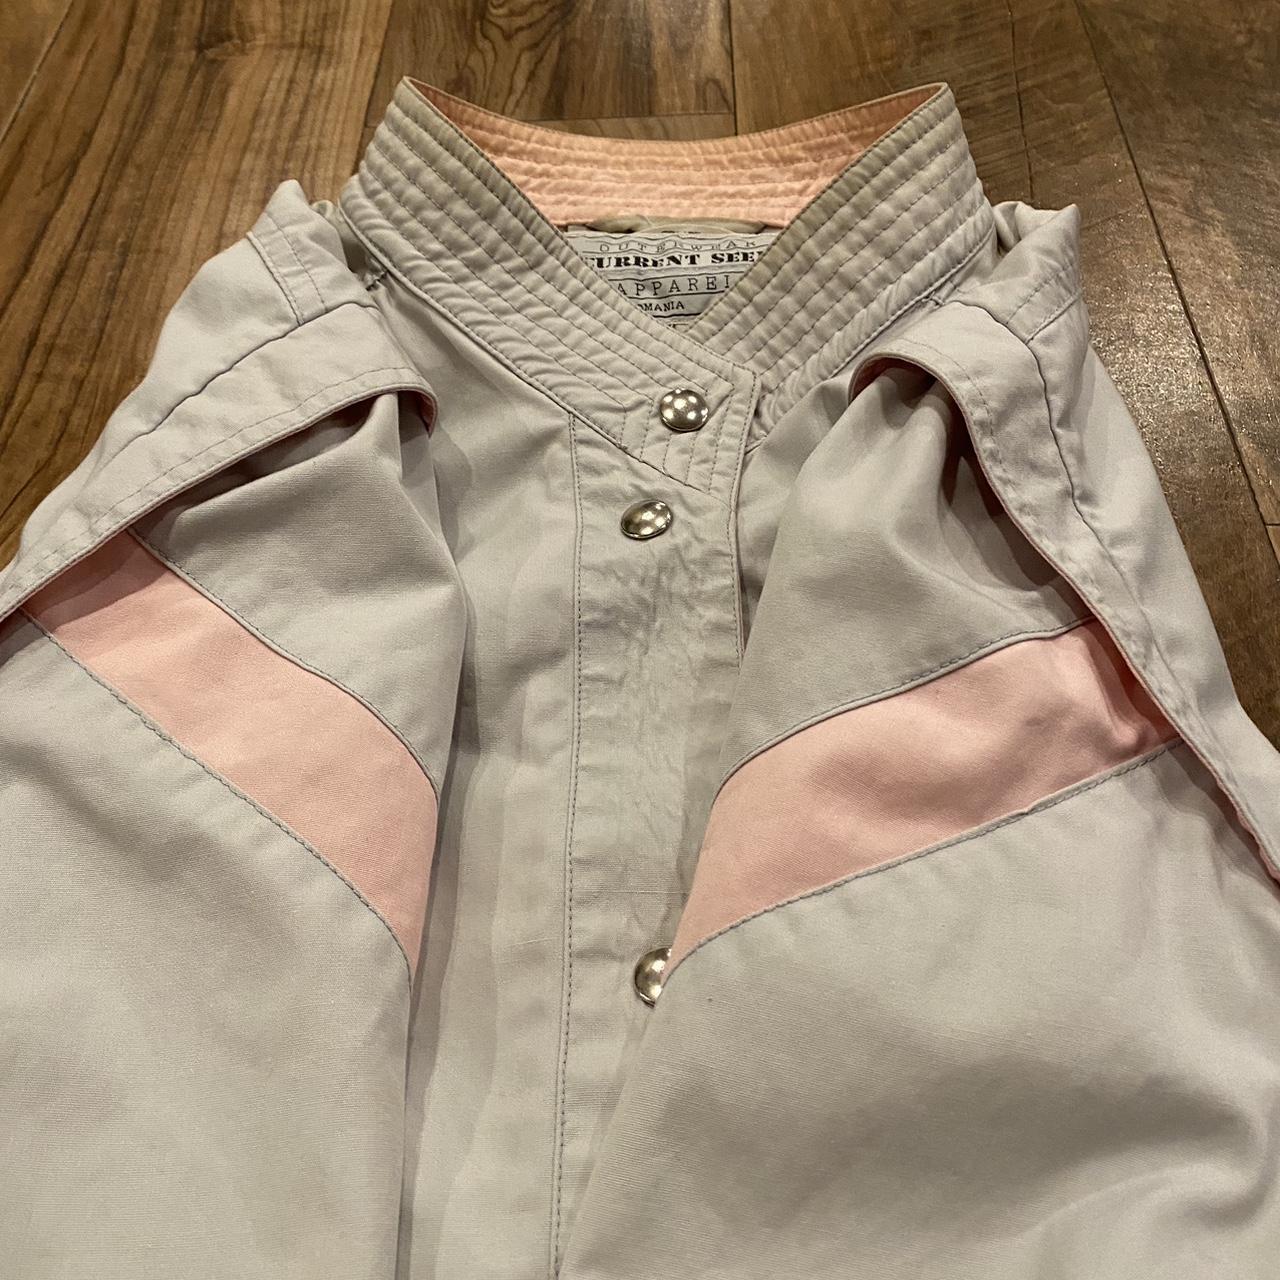 Current Seen Women's Grey and Pink Jacket (2)